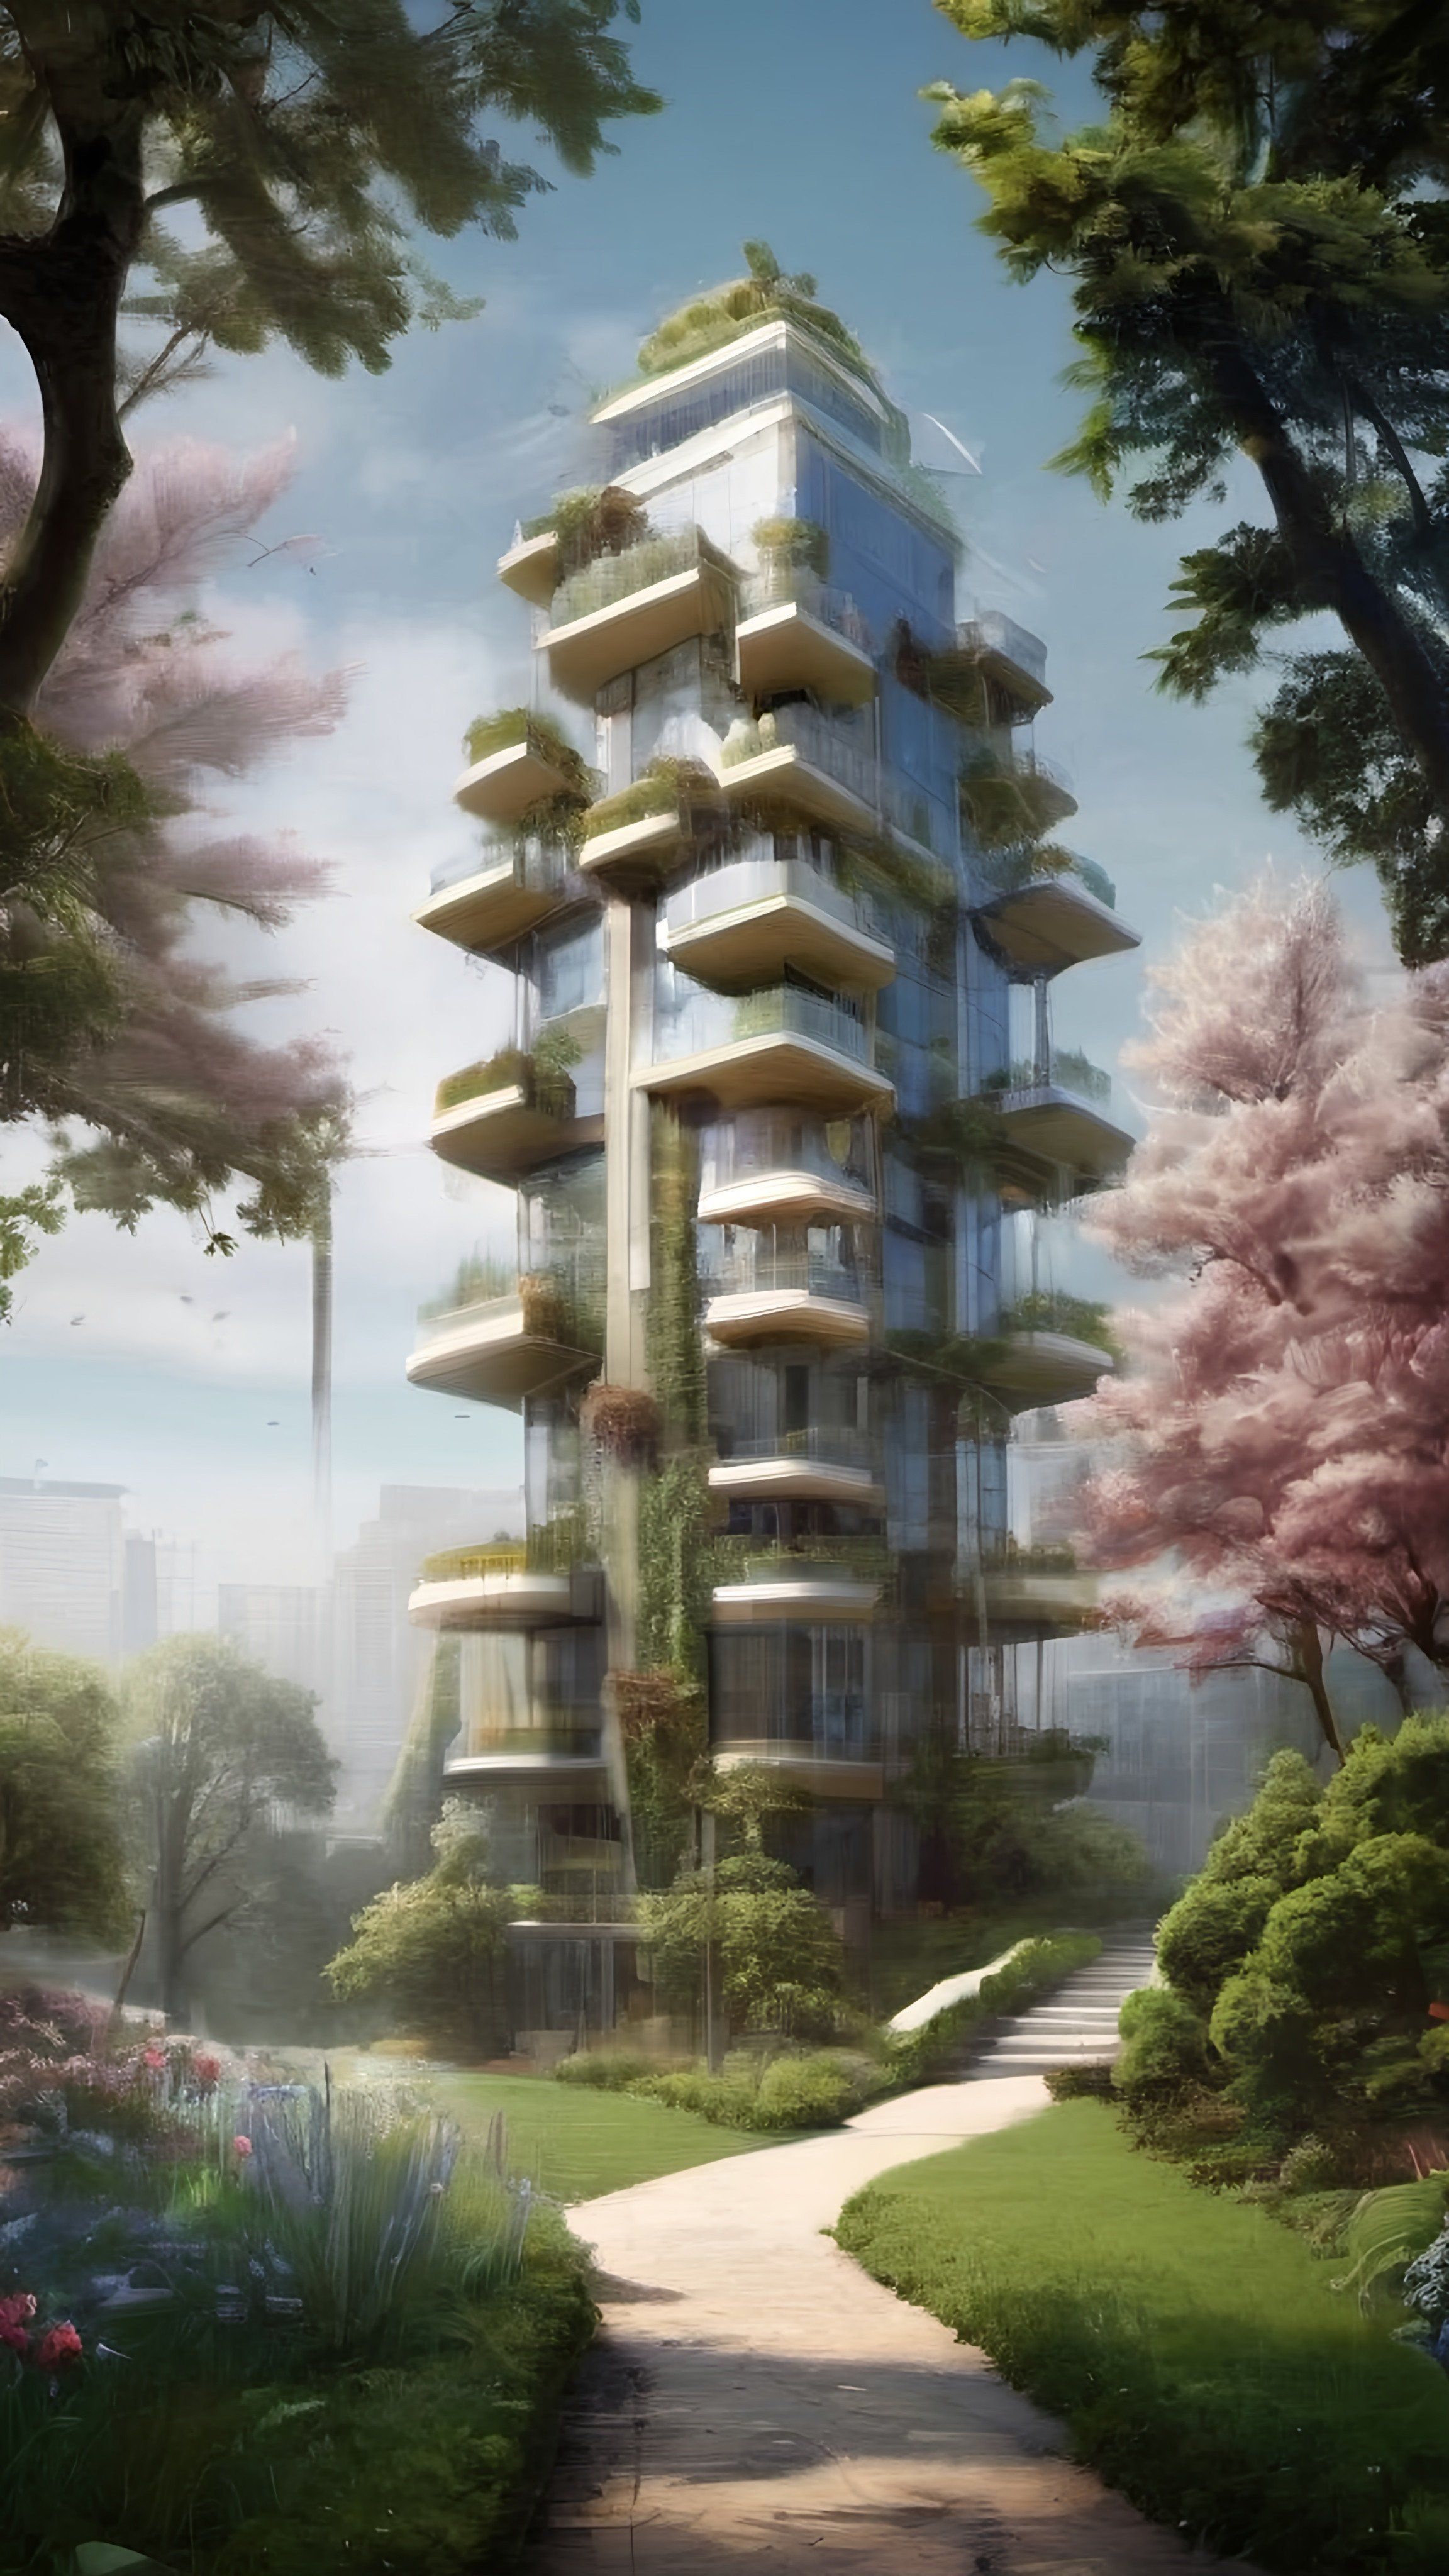 Prompt: a tall building with balconies on the top of it in a park with trees and flowers on the ground